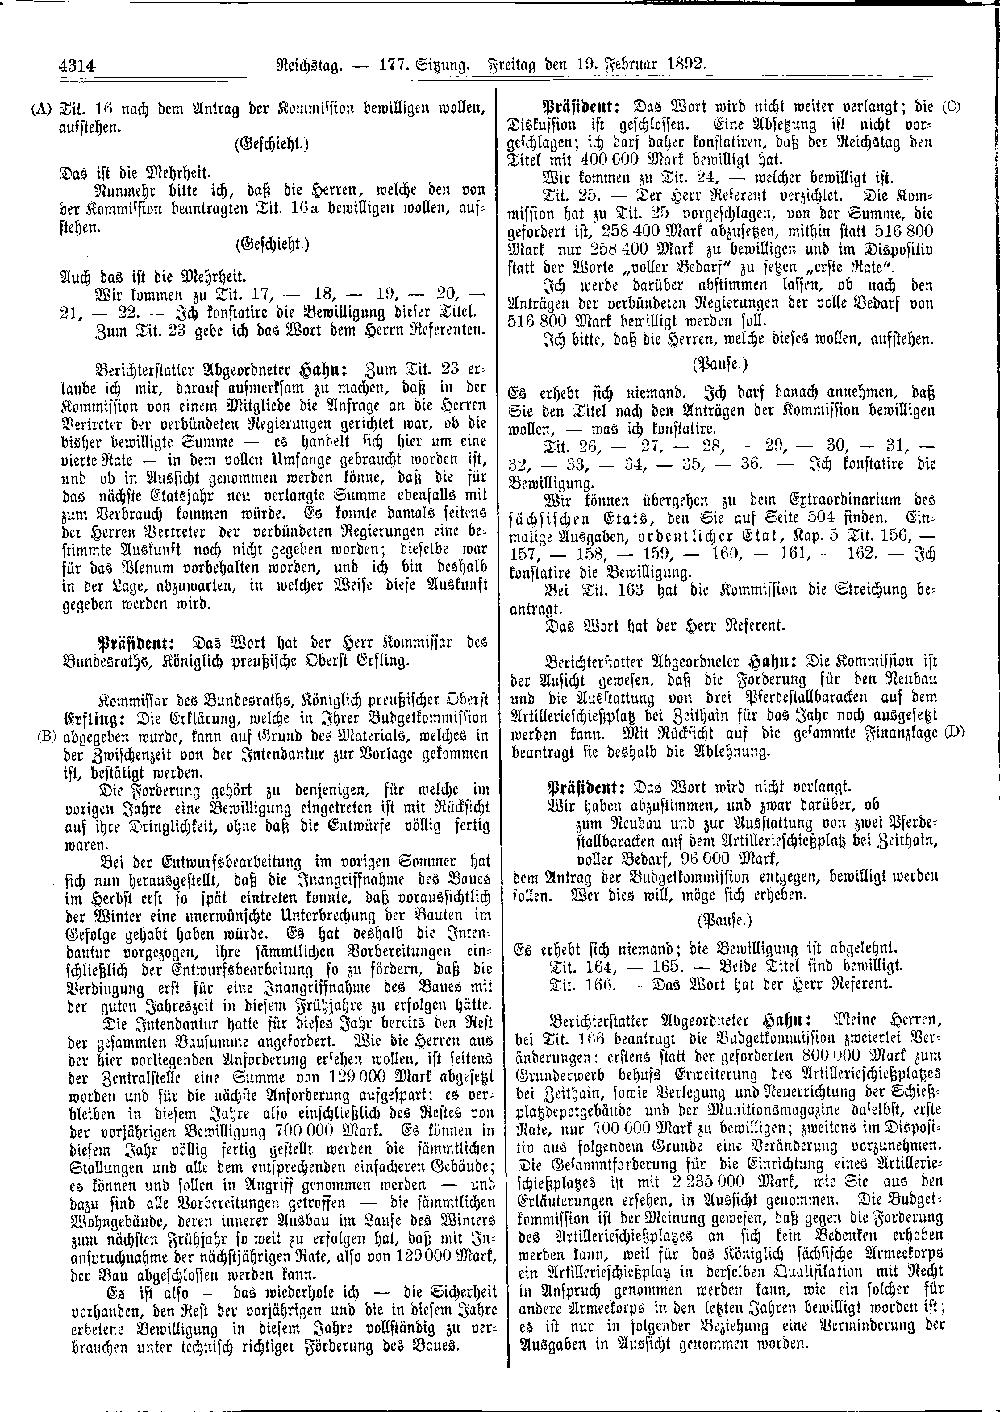 Scan of page 4314